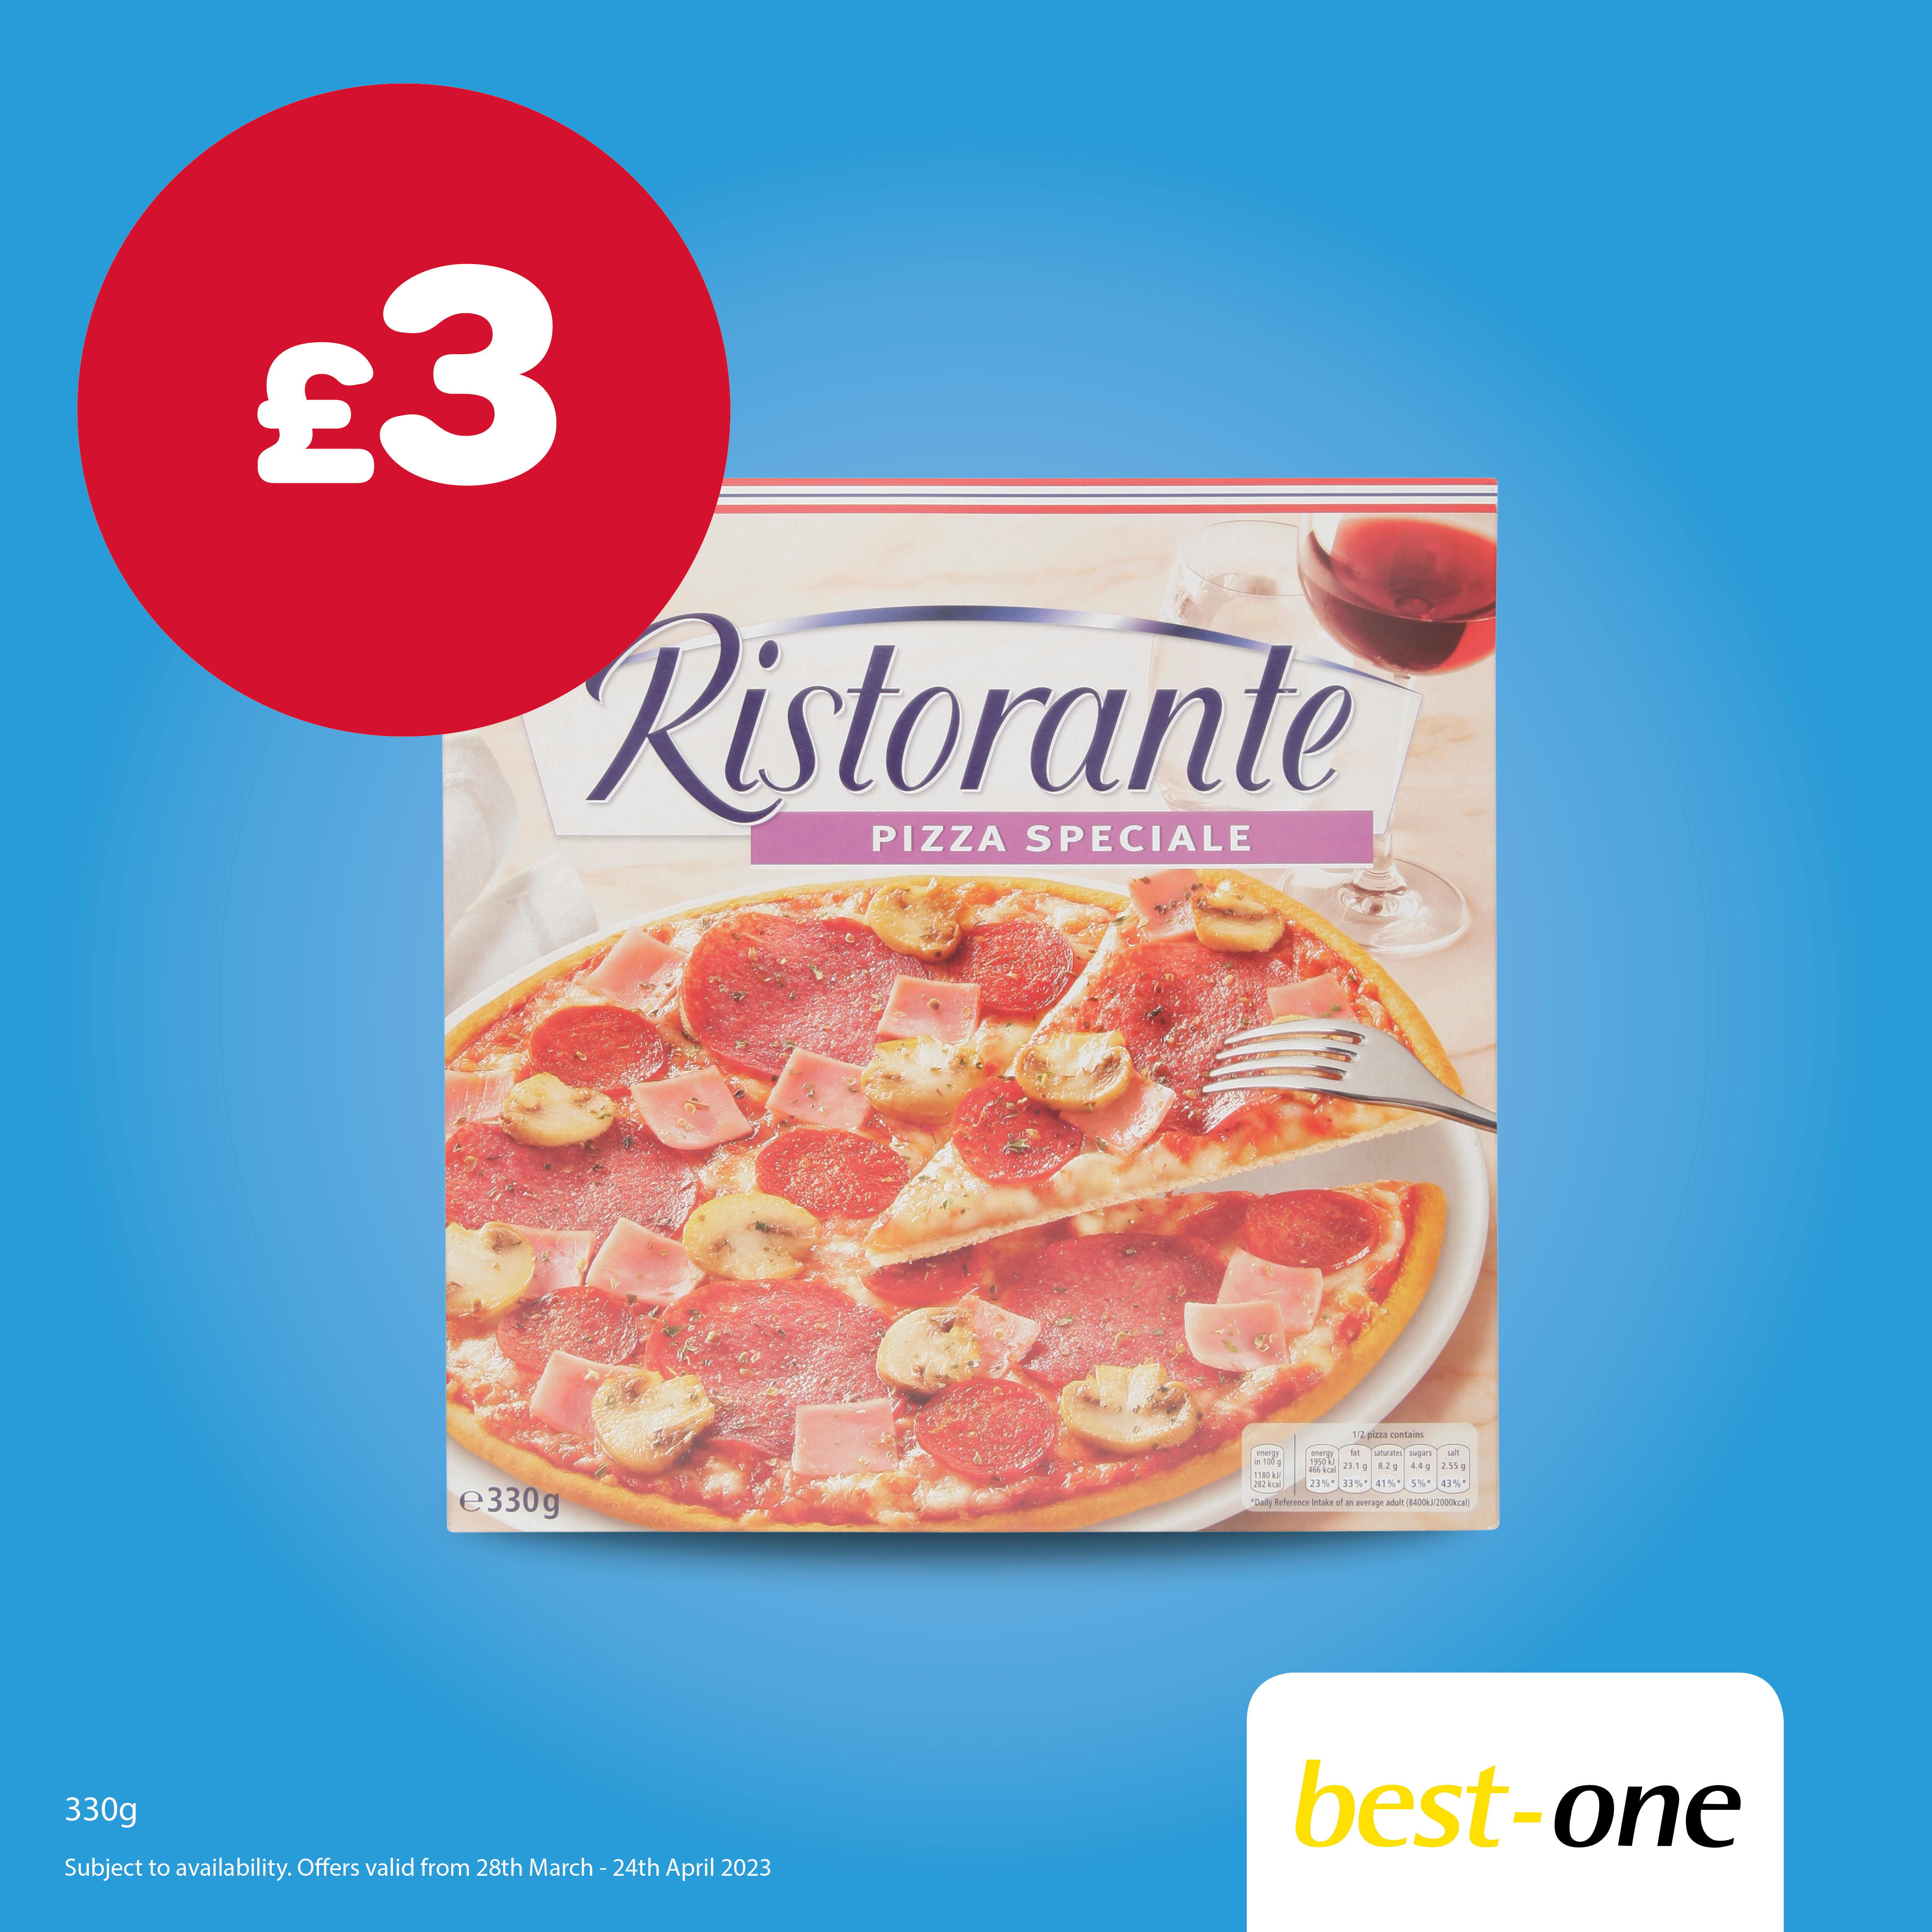 Buy Ristorante Pizza 330g for £3 each. Offer available from selected stores only on 28th March to 24 South Hylton Convenience, Best-one Sunderland 020 8453 1234